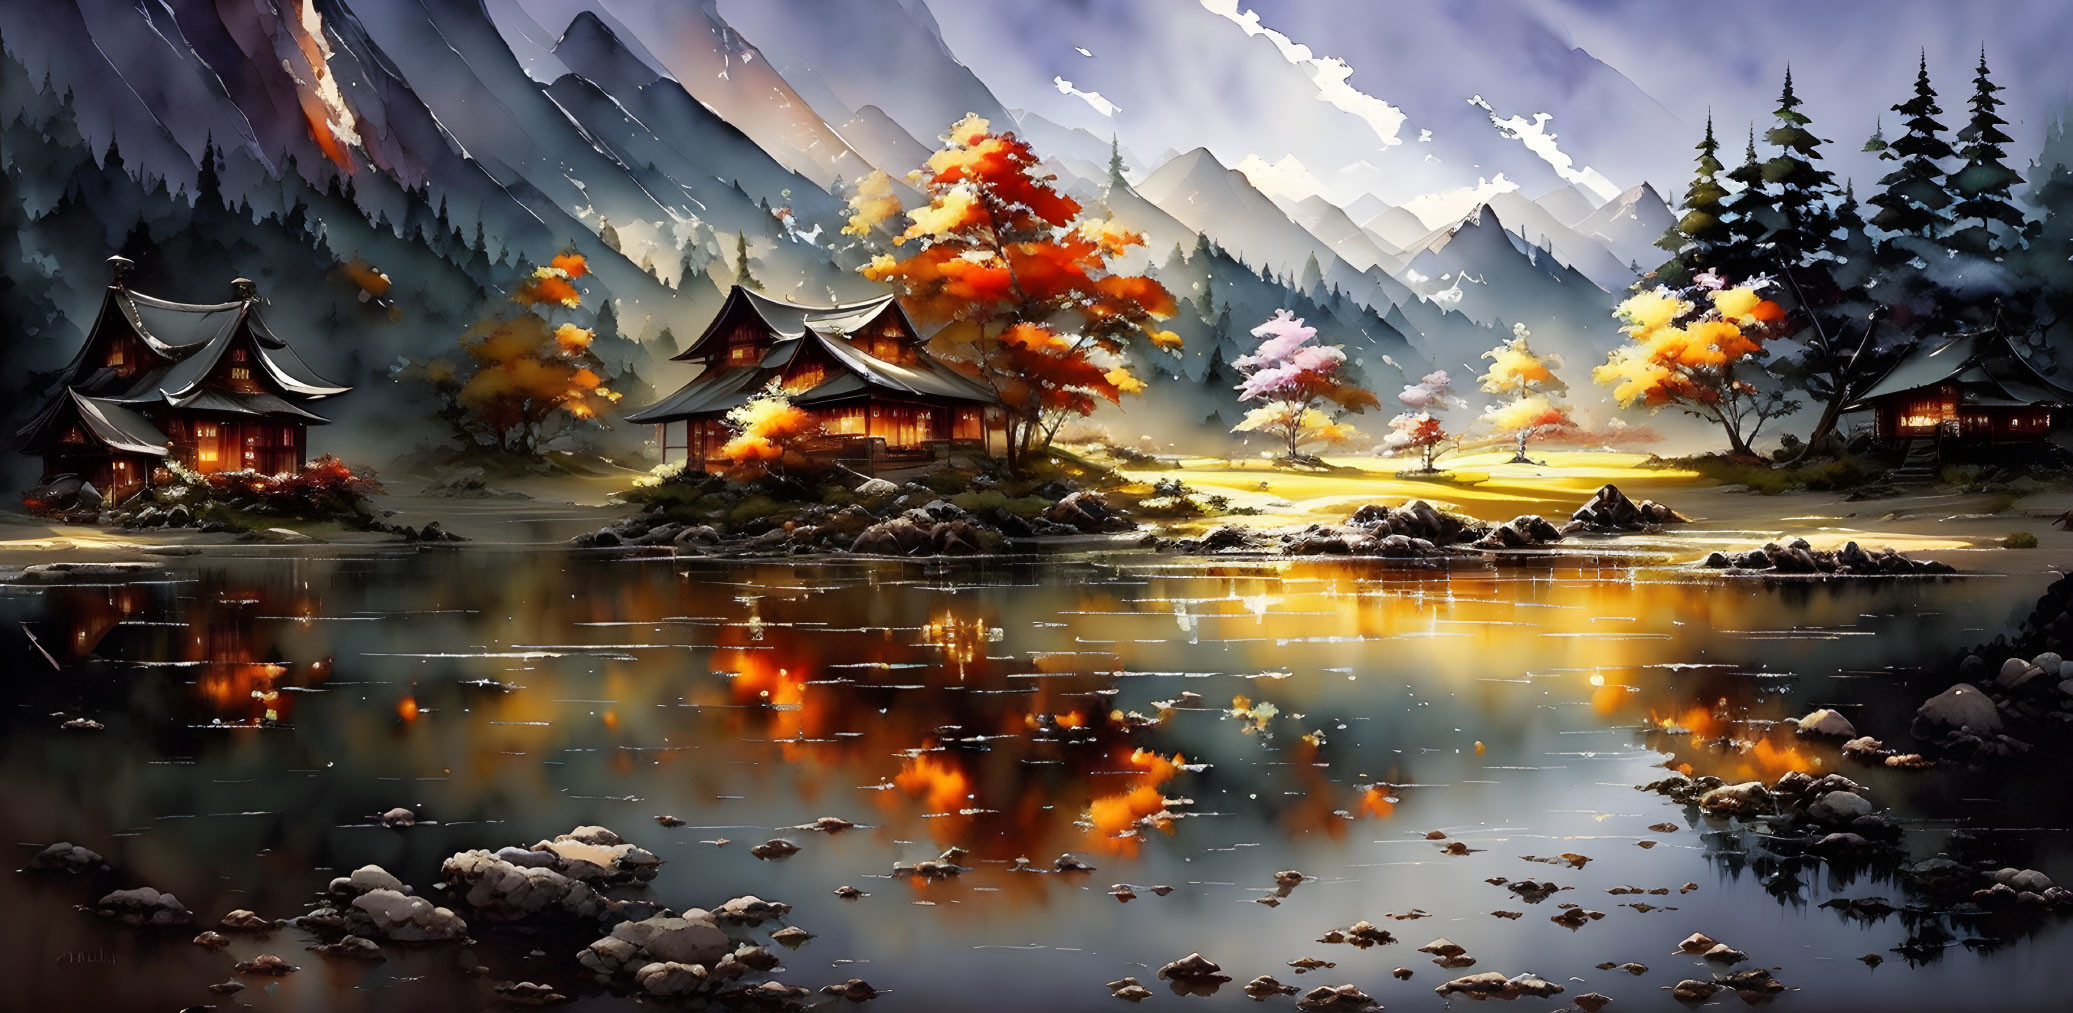 Autumnal lakeside houses with mountains and twilight ambiance.